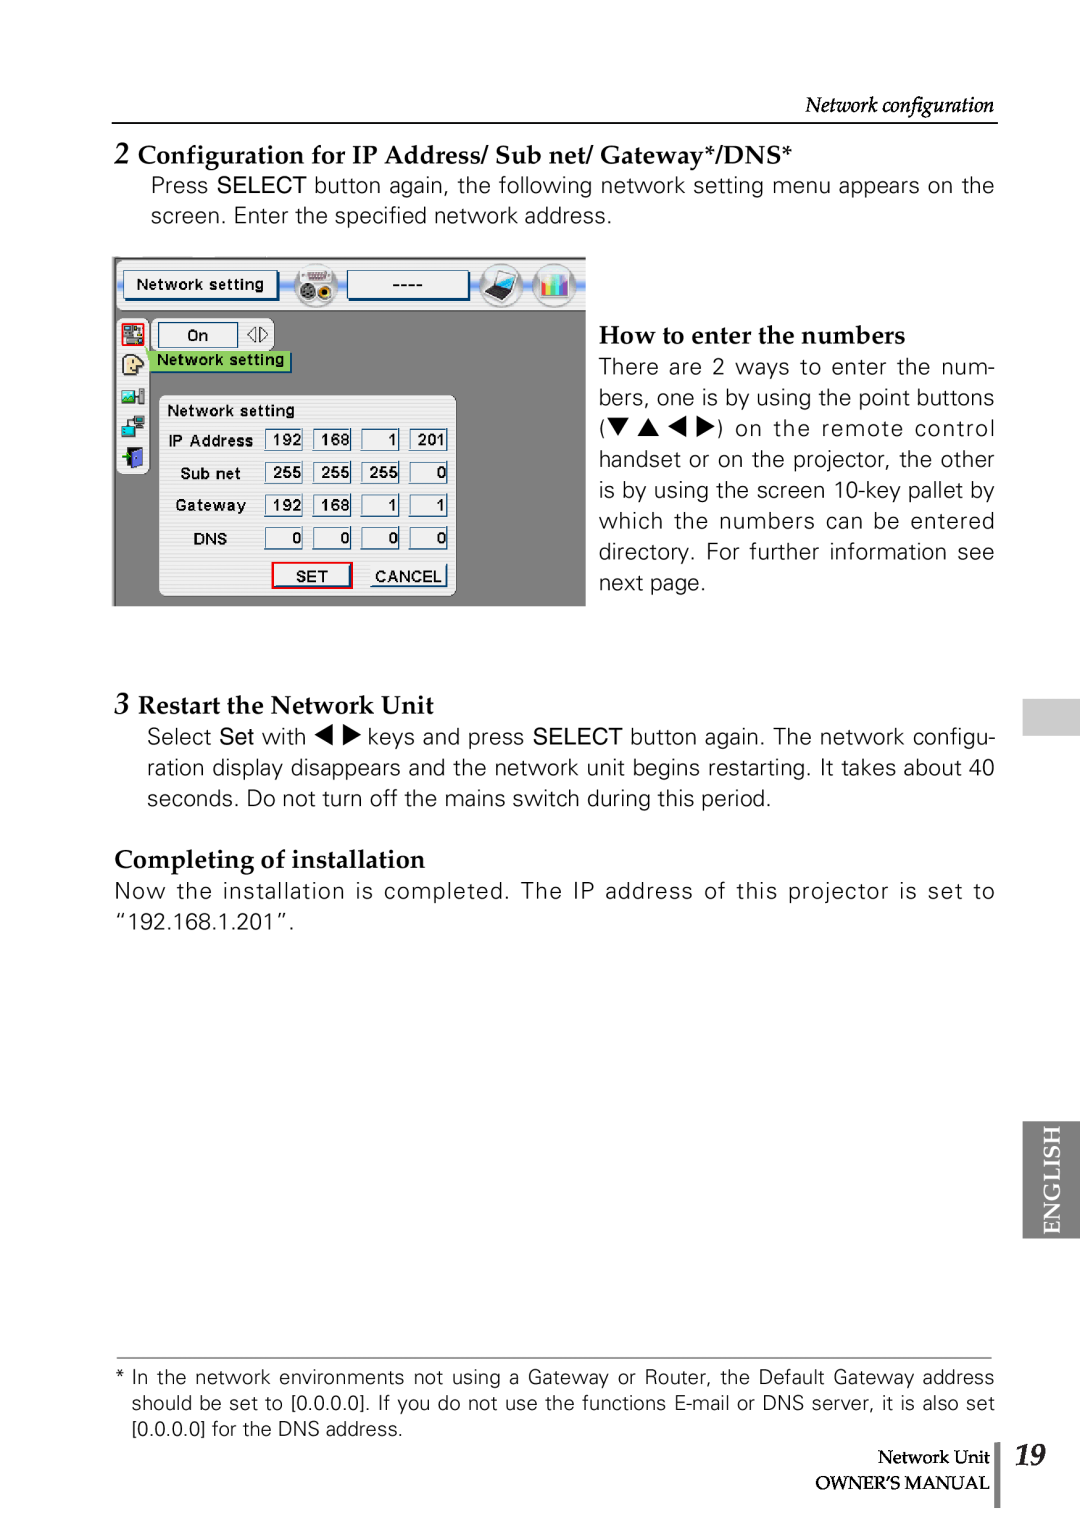 Sanyo POA-PN02 Configuration for IP Address/ Sub net/ Gateway*/DNS, How to enter the numbers, Restart the Network Unit 